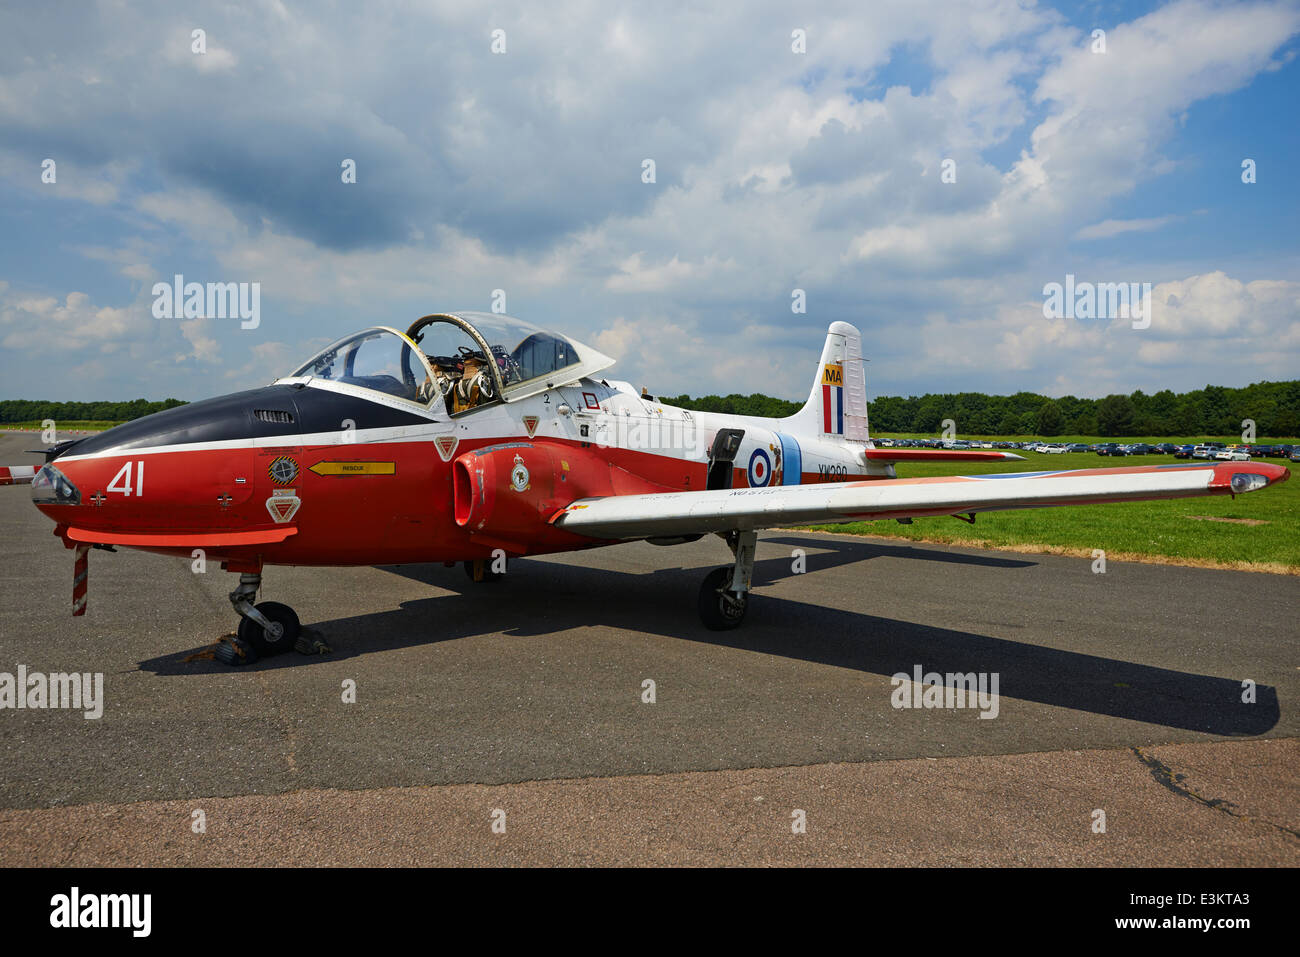 BAC Jet Provost T5 A RAF trainer aircraft built in 1969 Bruntingthorpe Airfield Leicestershire UK Stock Photo